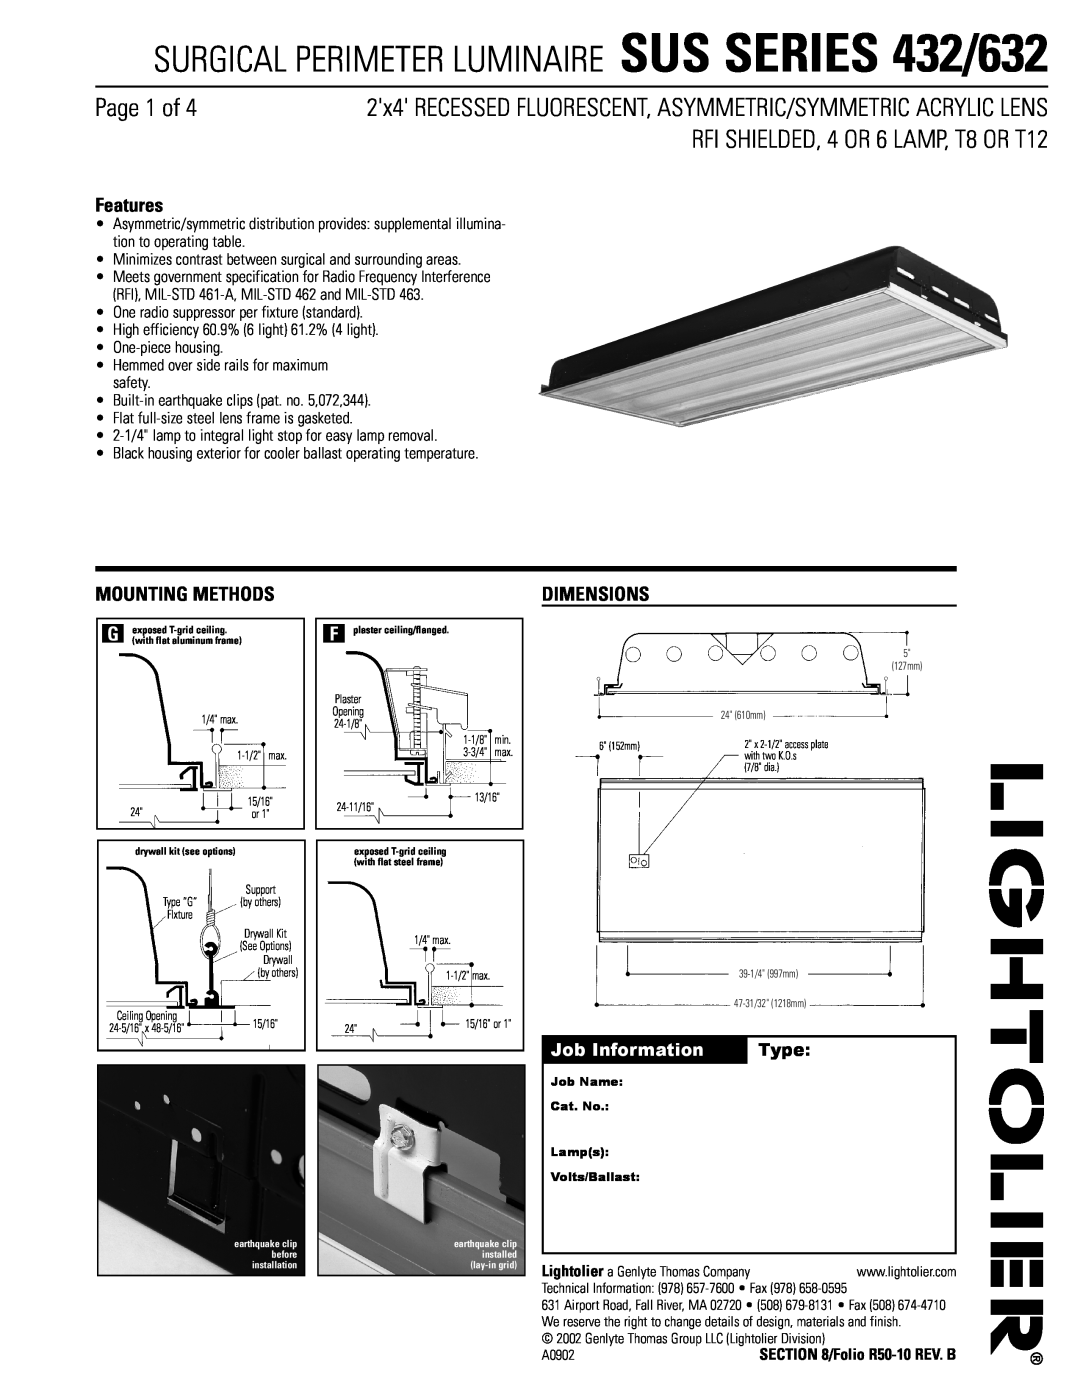 Lightolier dimensions SURGICAL PERIMETER LUMINAIRE SUS SERIES 432/632, Page 1 of, RFI SHIELDED, 4 OR 6 LAMP, T8 OR T12 